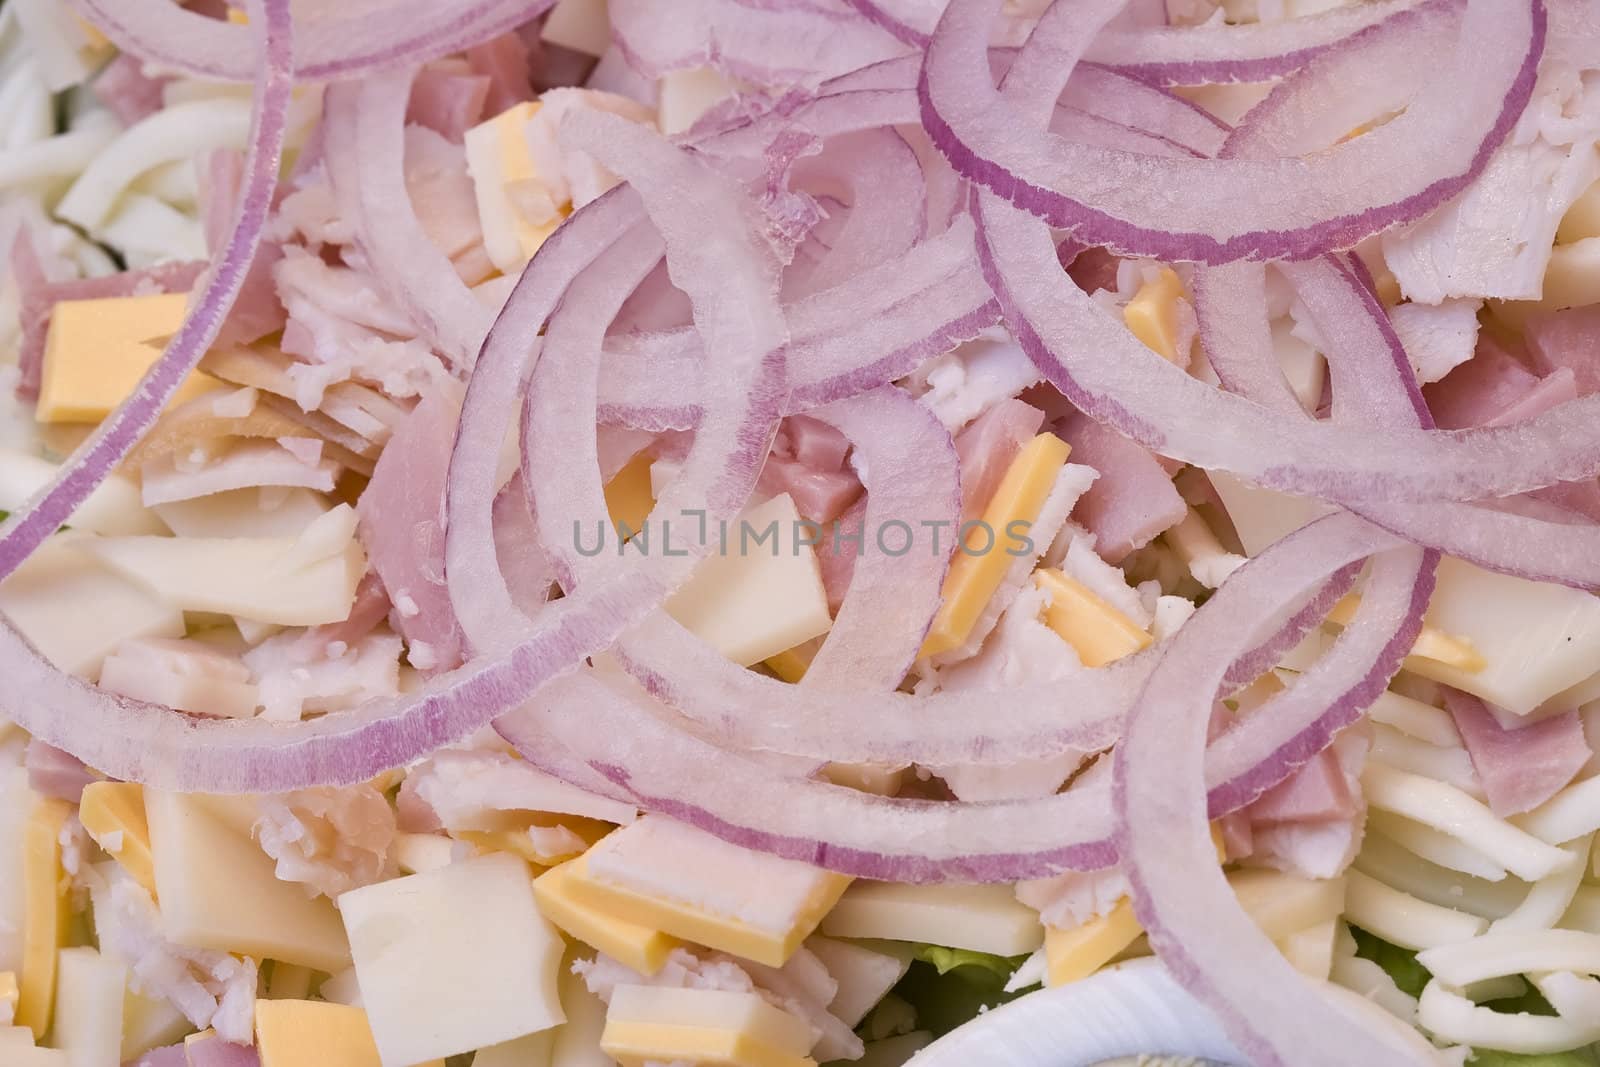 macro shot of a dinner salad with tons of red onions